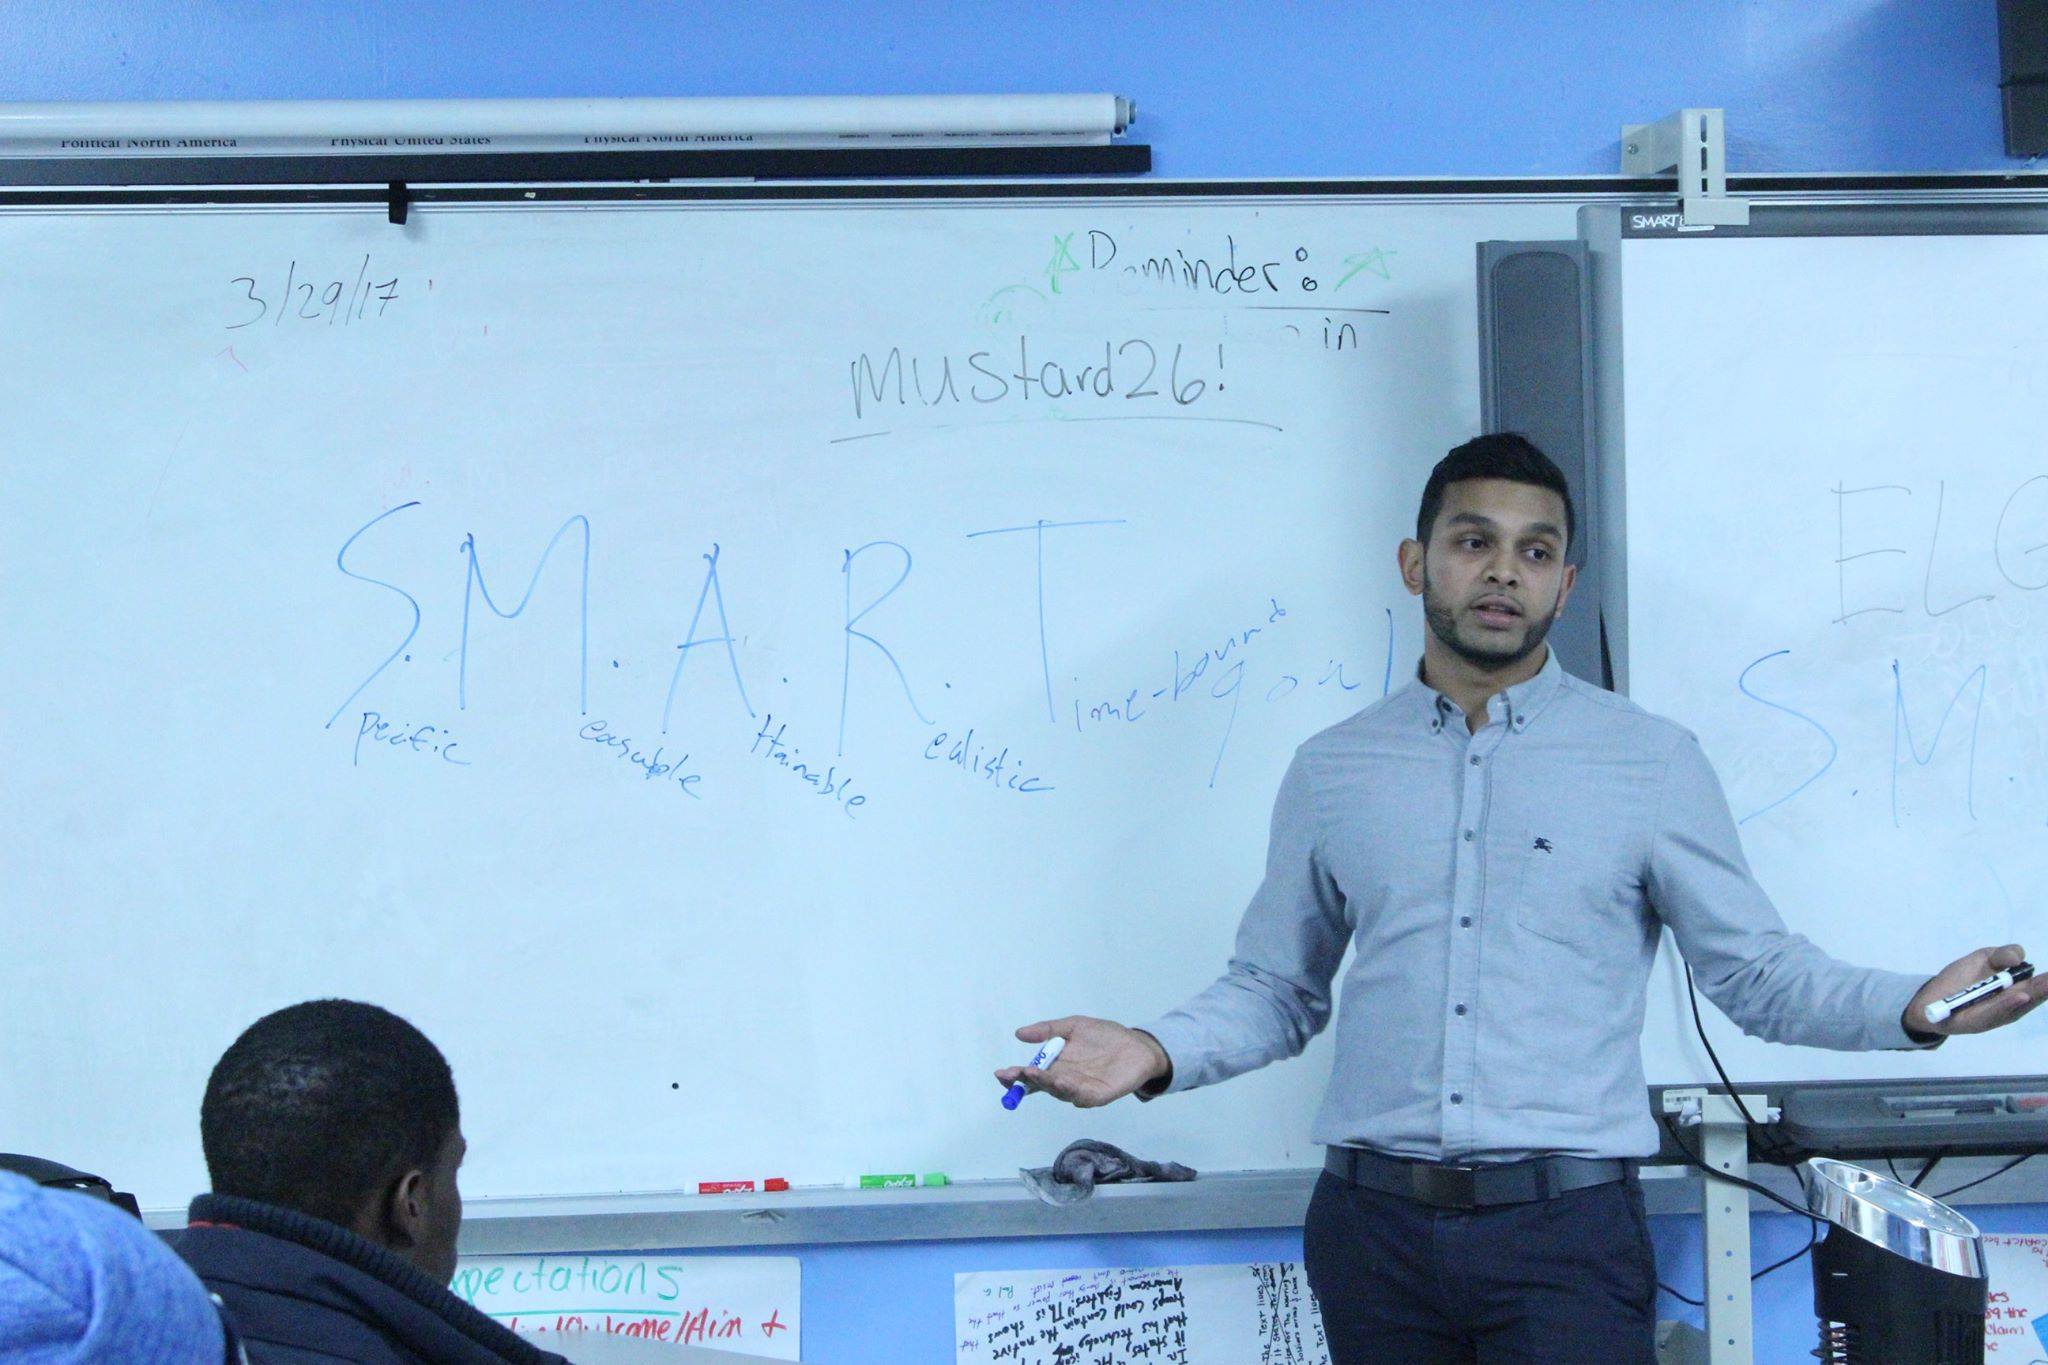 Money Hub supports teens in NYC through financial literacy